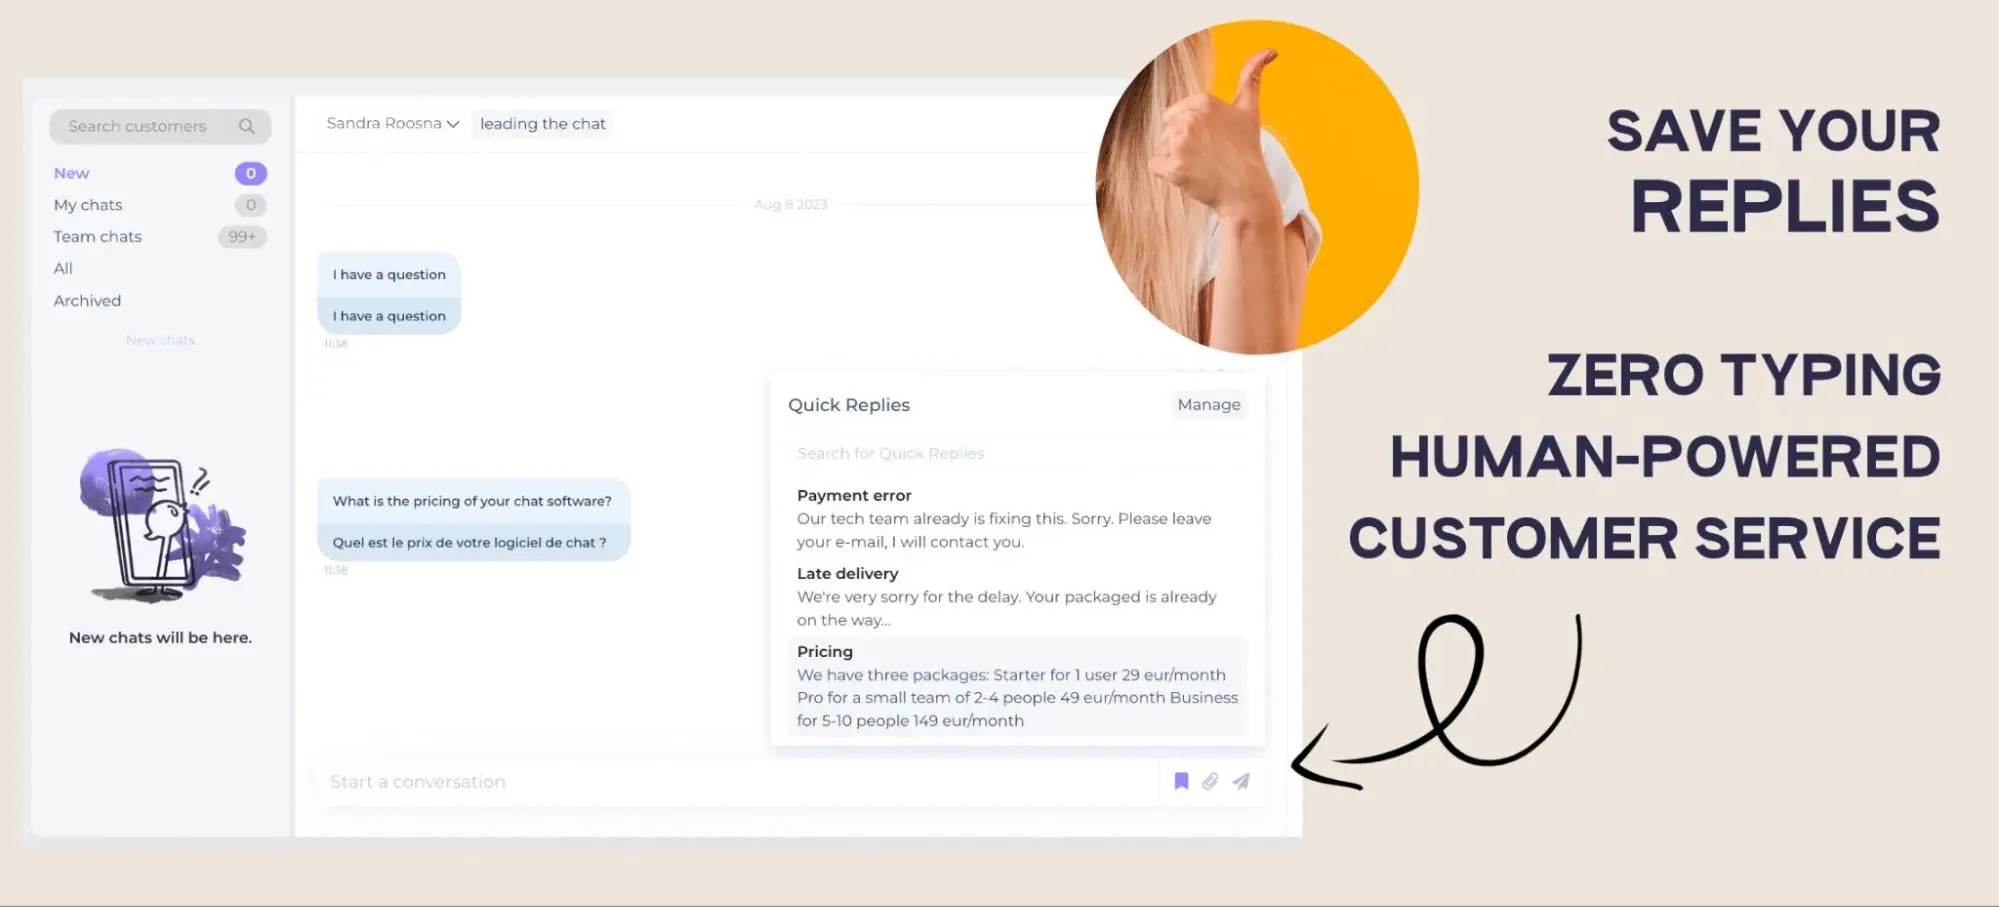 Chatbot or live chat to save replies and make customer support faster